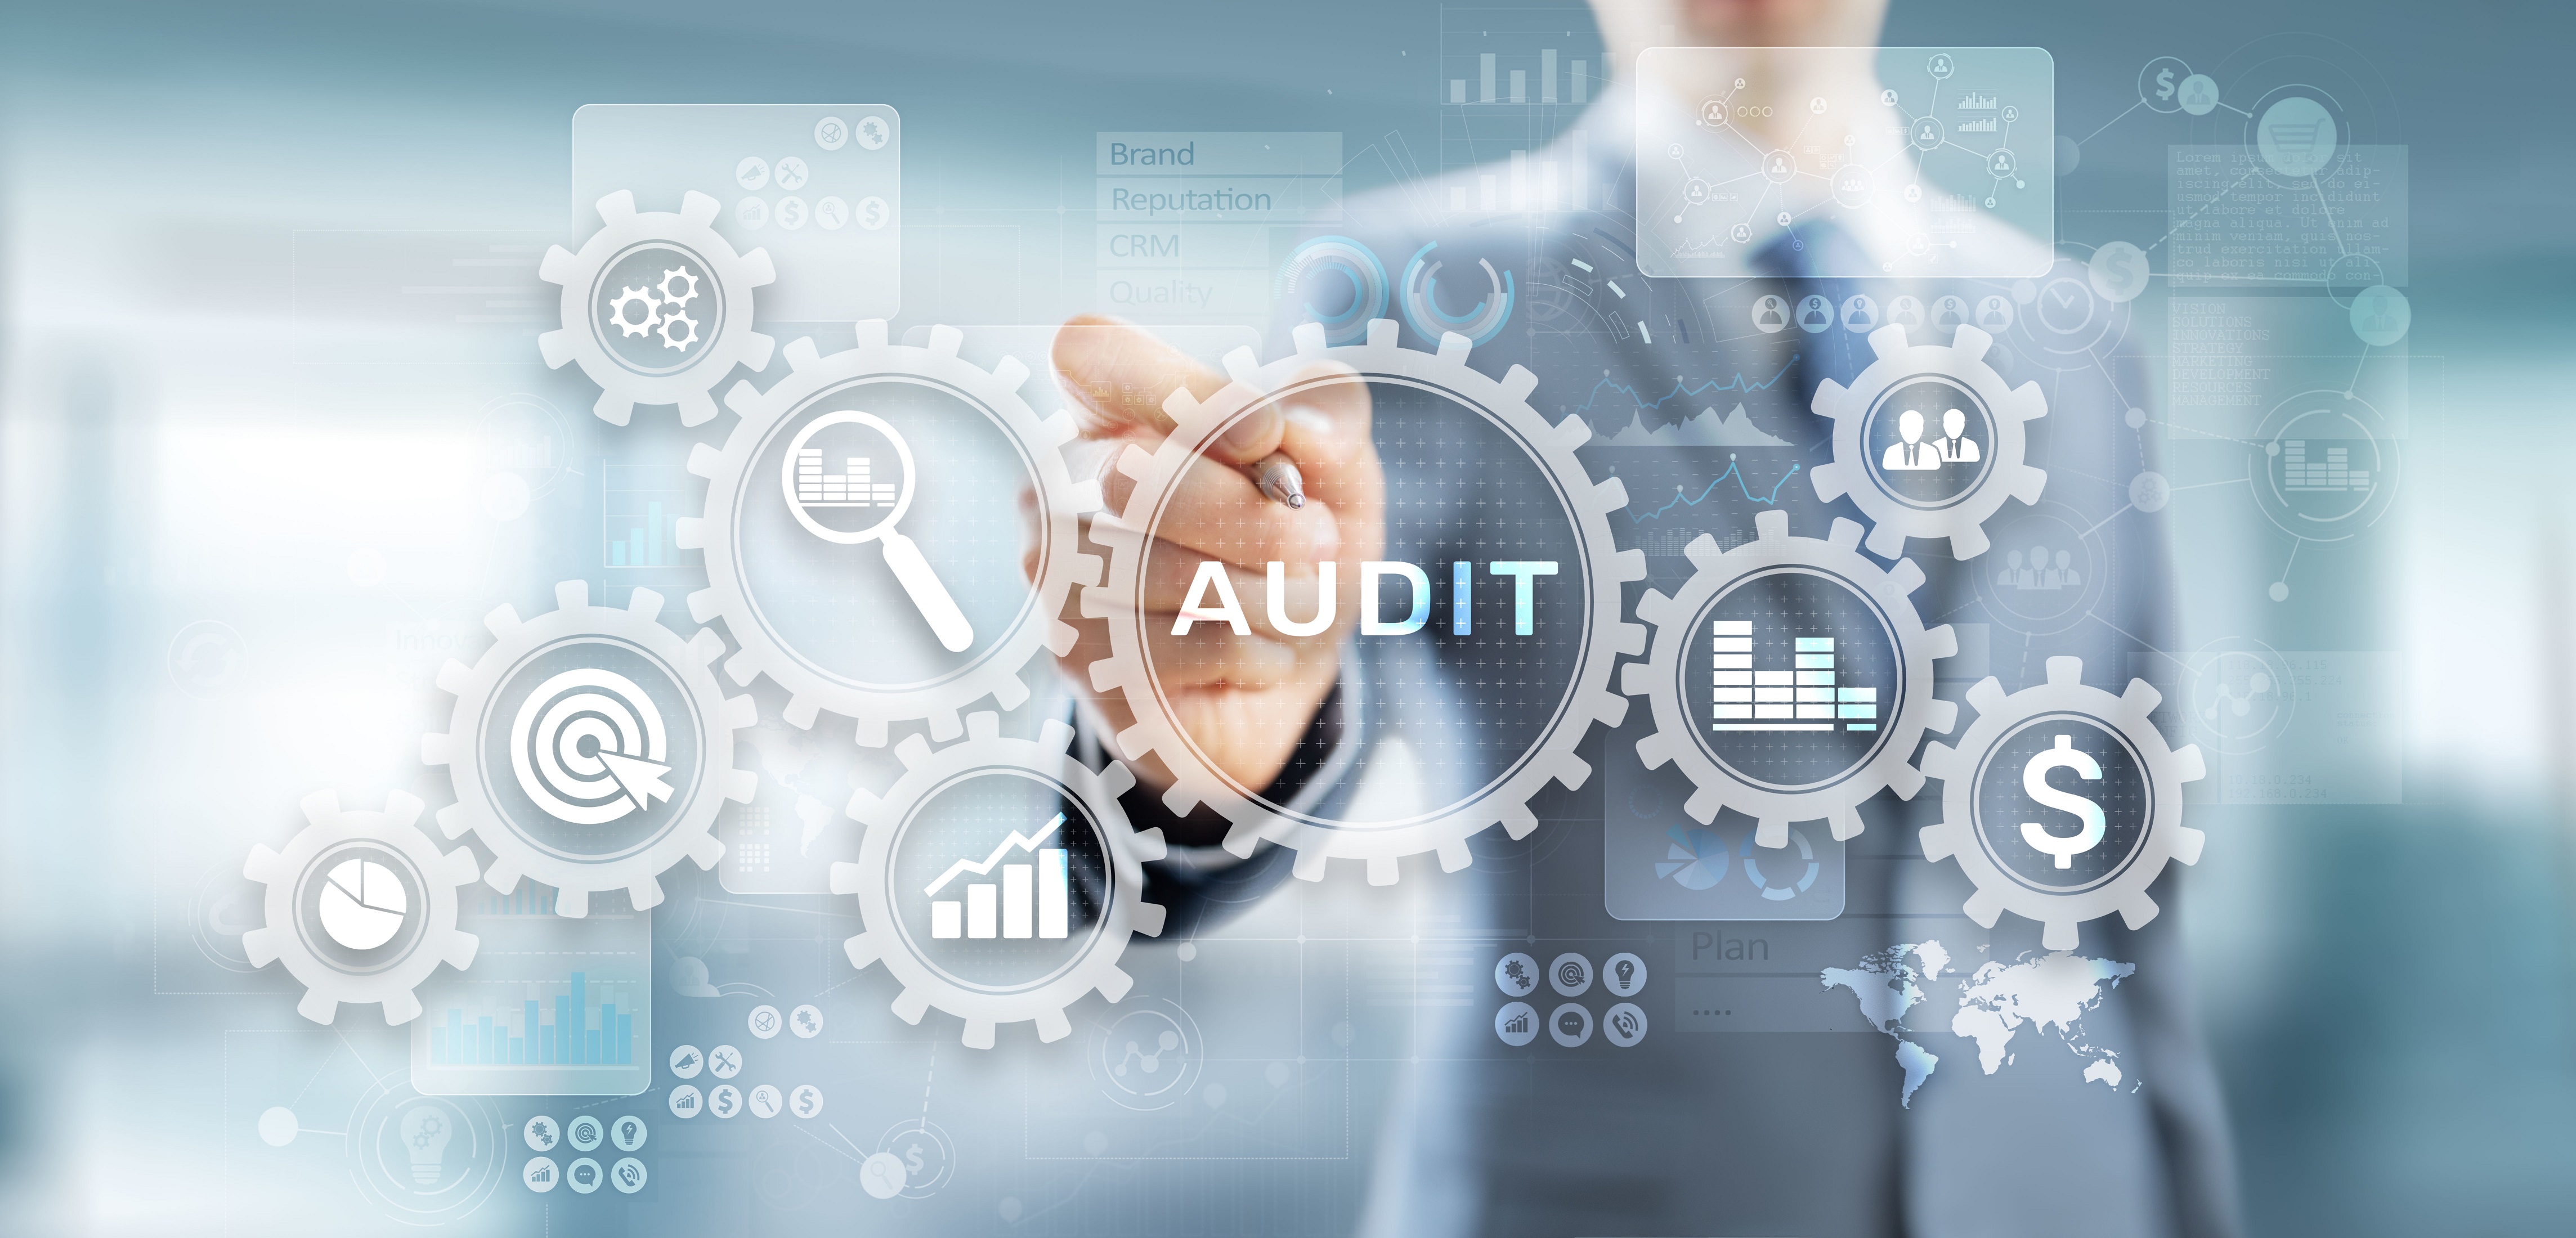 Key features of specialized audit software from redboard